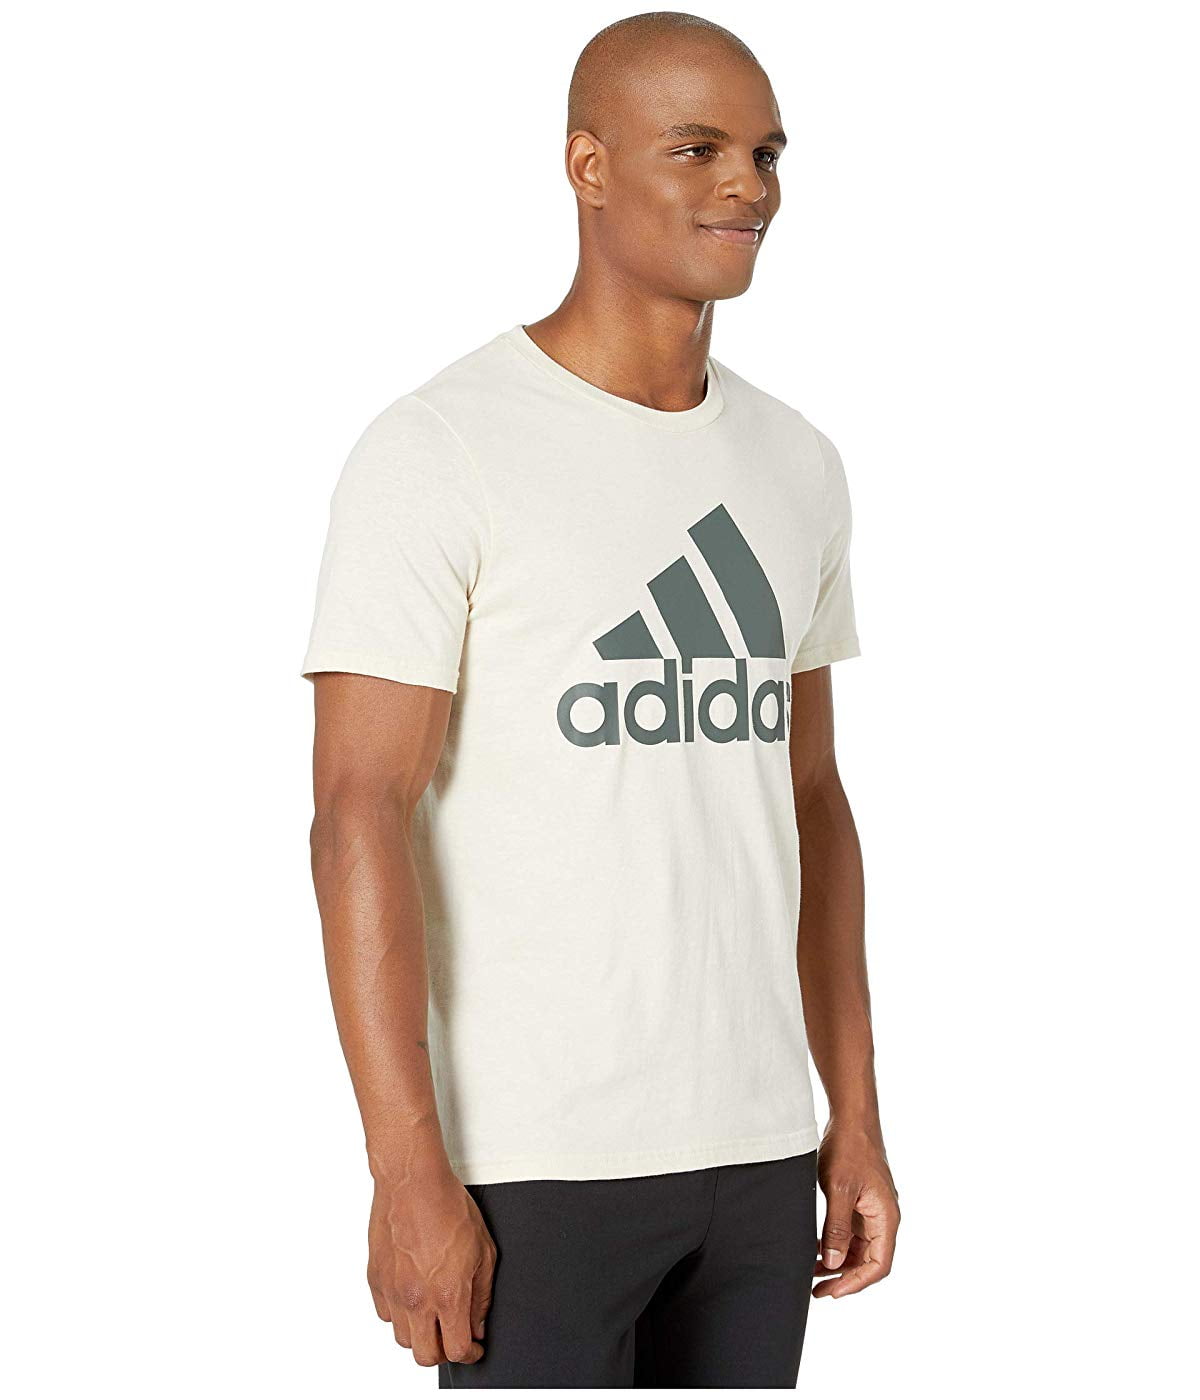 Adidas Men's Basic Bos Tee Sport Shirt T-Shirt Athletic Work Out (Charcoal,  L) 